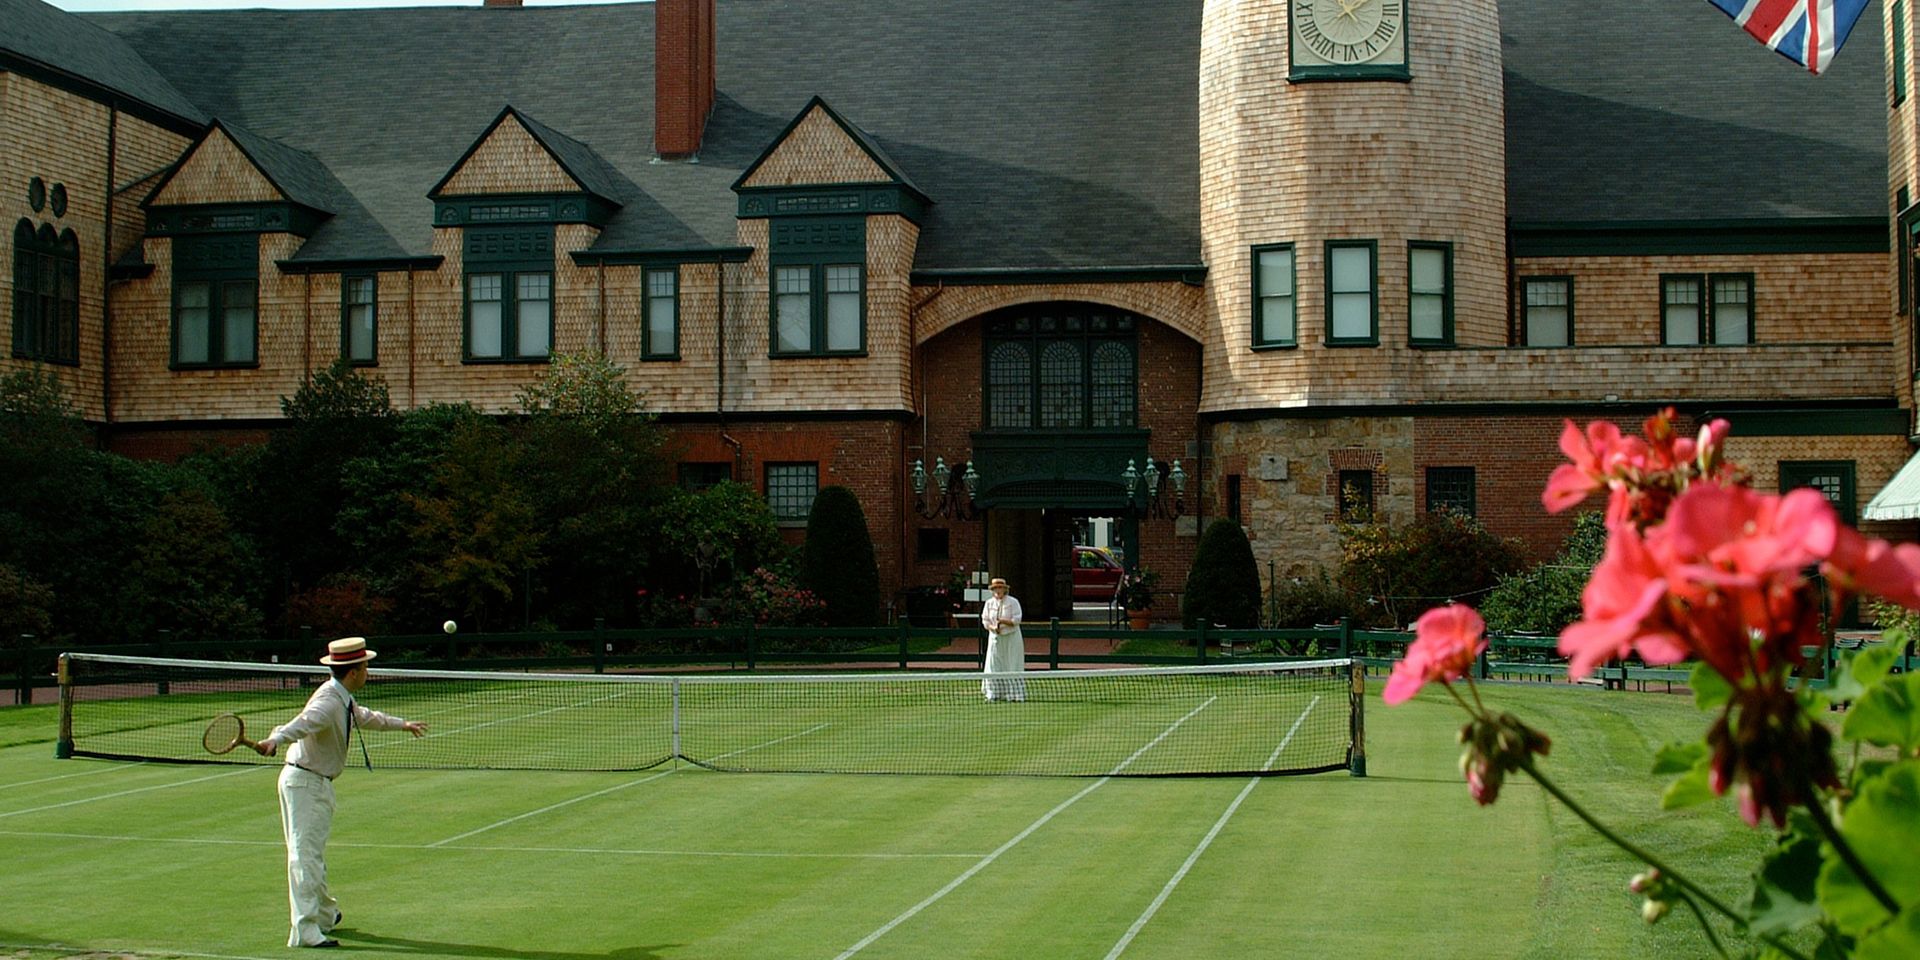 A Group Of People On A Grass Court With International Tennis Hall Of Fame In The Background